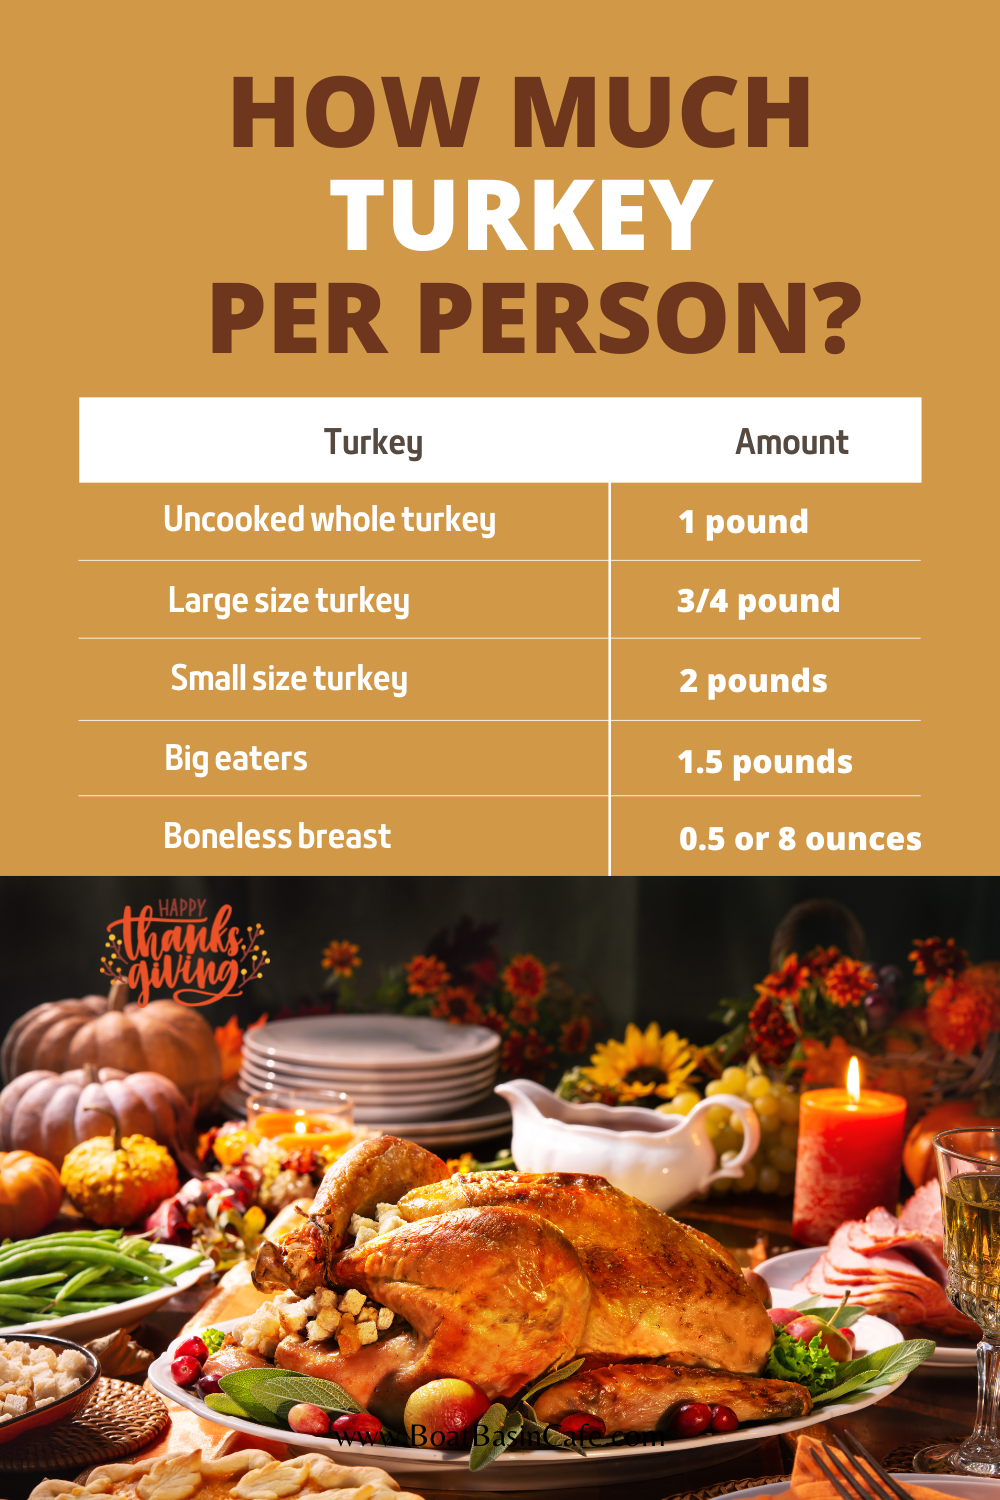 How Much Turkey Per Person Do I Need?